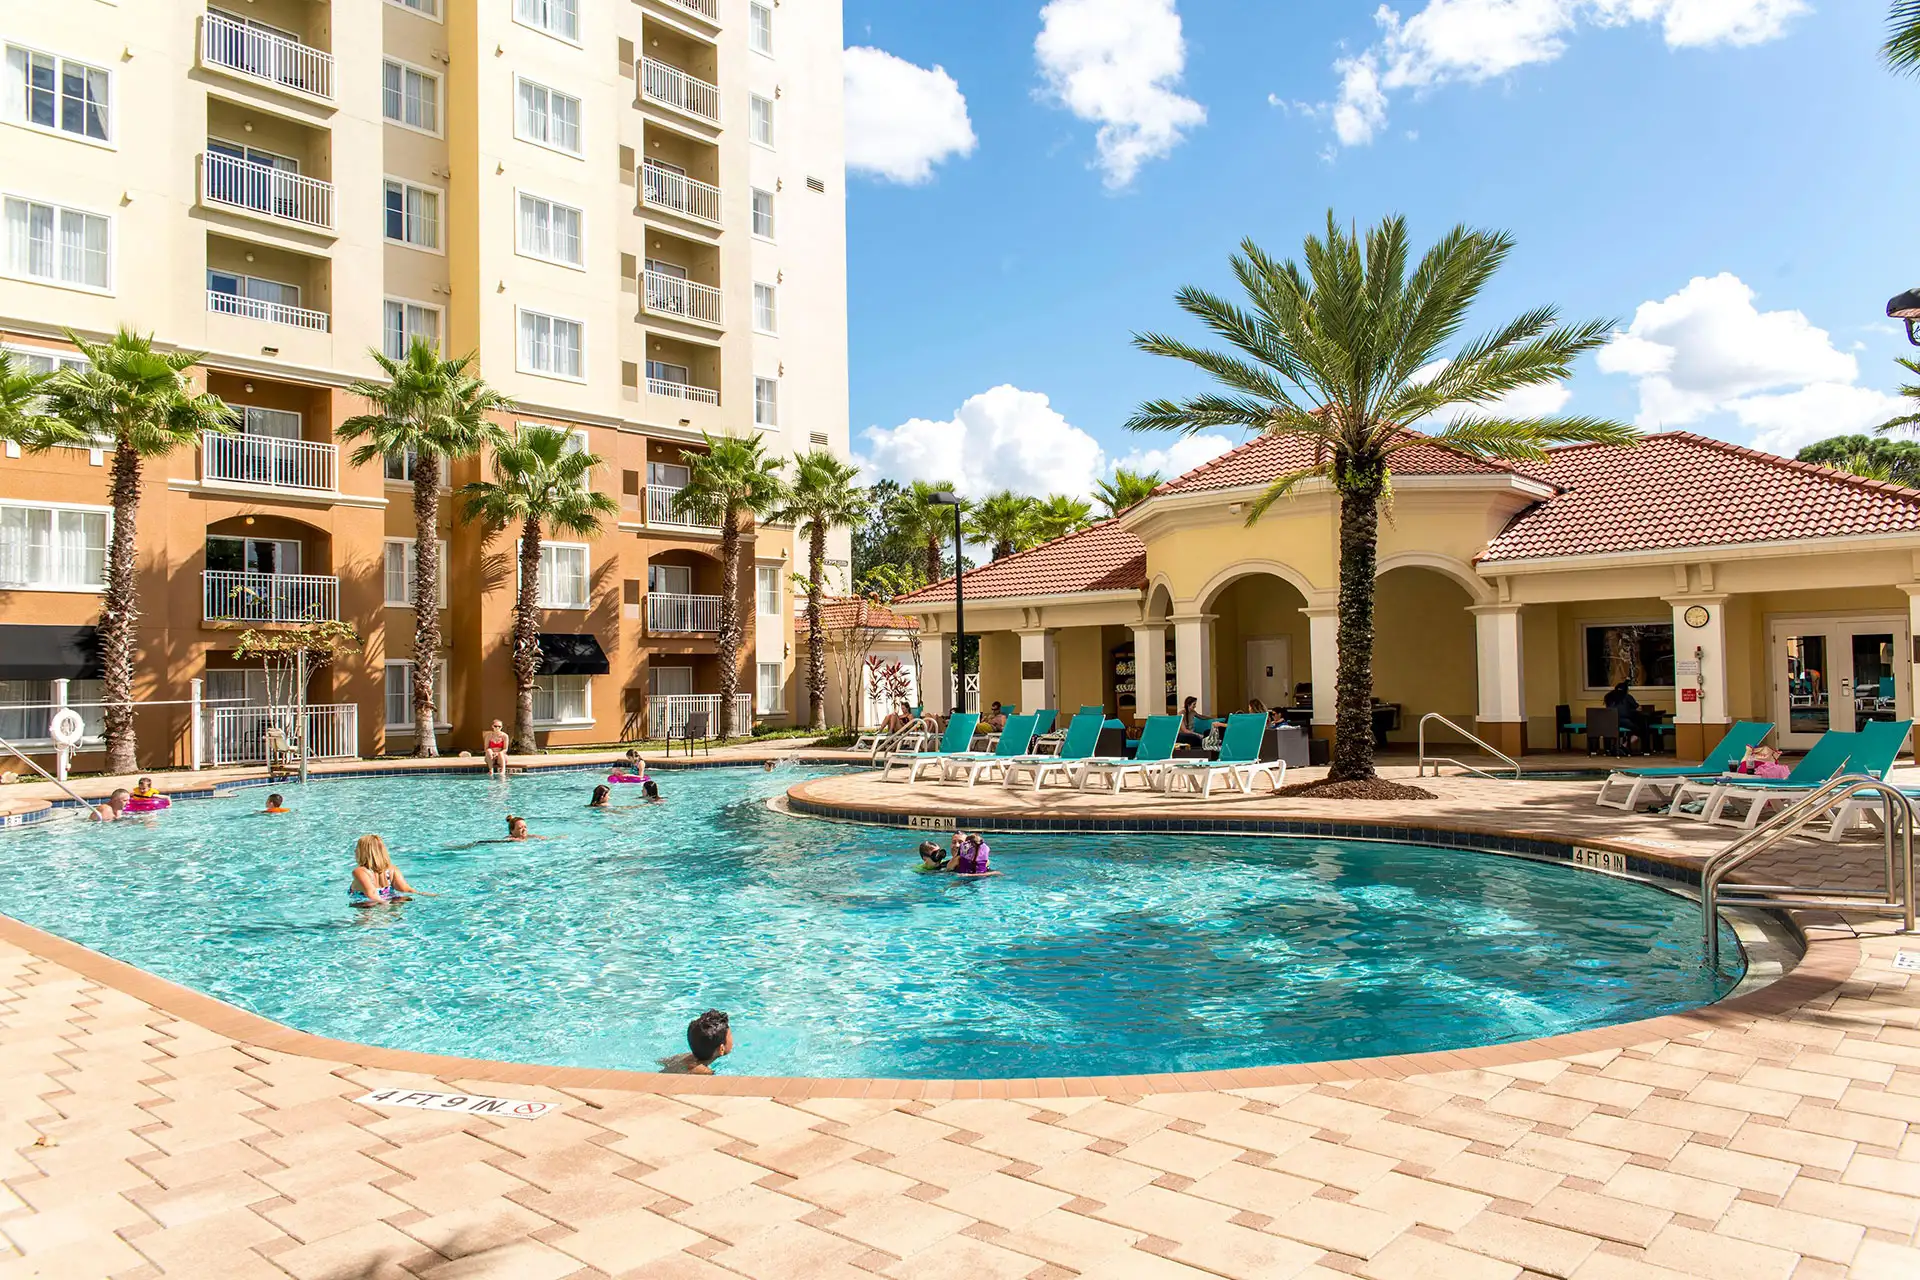 Pool at The Point Hotel & Suites in Orlando